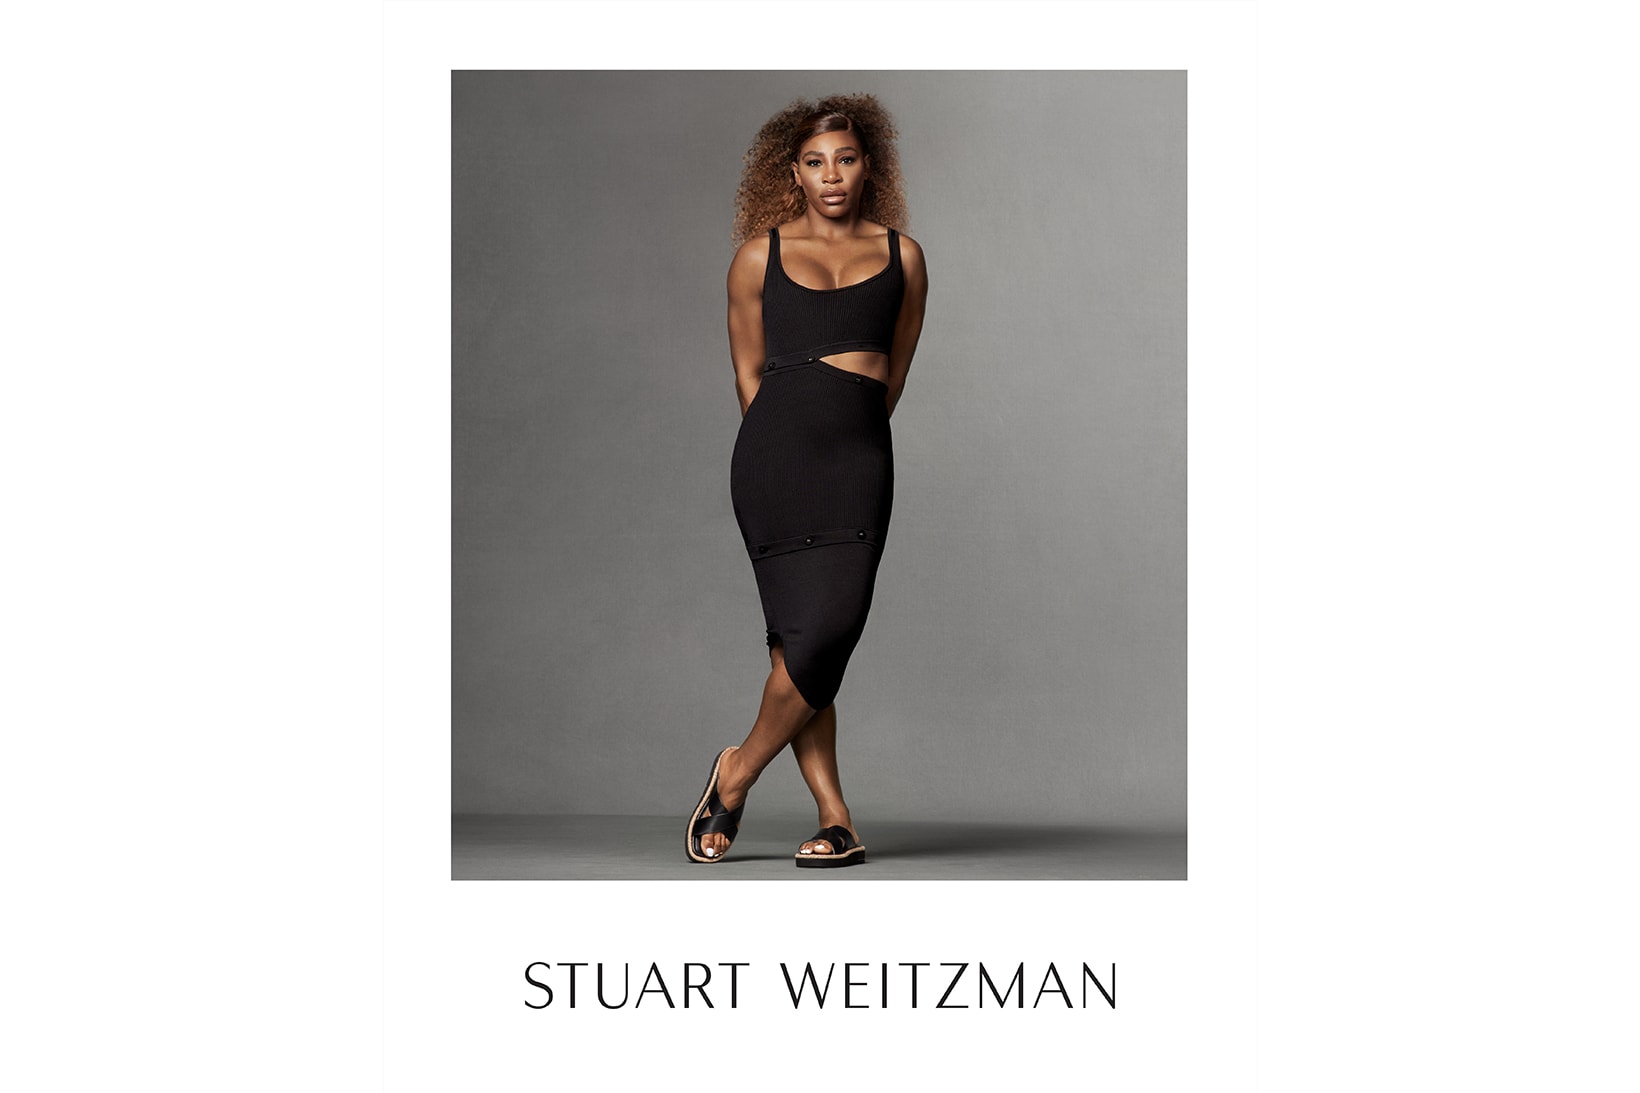 Serena Williams Daughter Alexis Olympia Ohanian Stuart Weitzman Spring/Summer 2021 Campaign